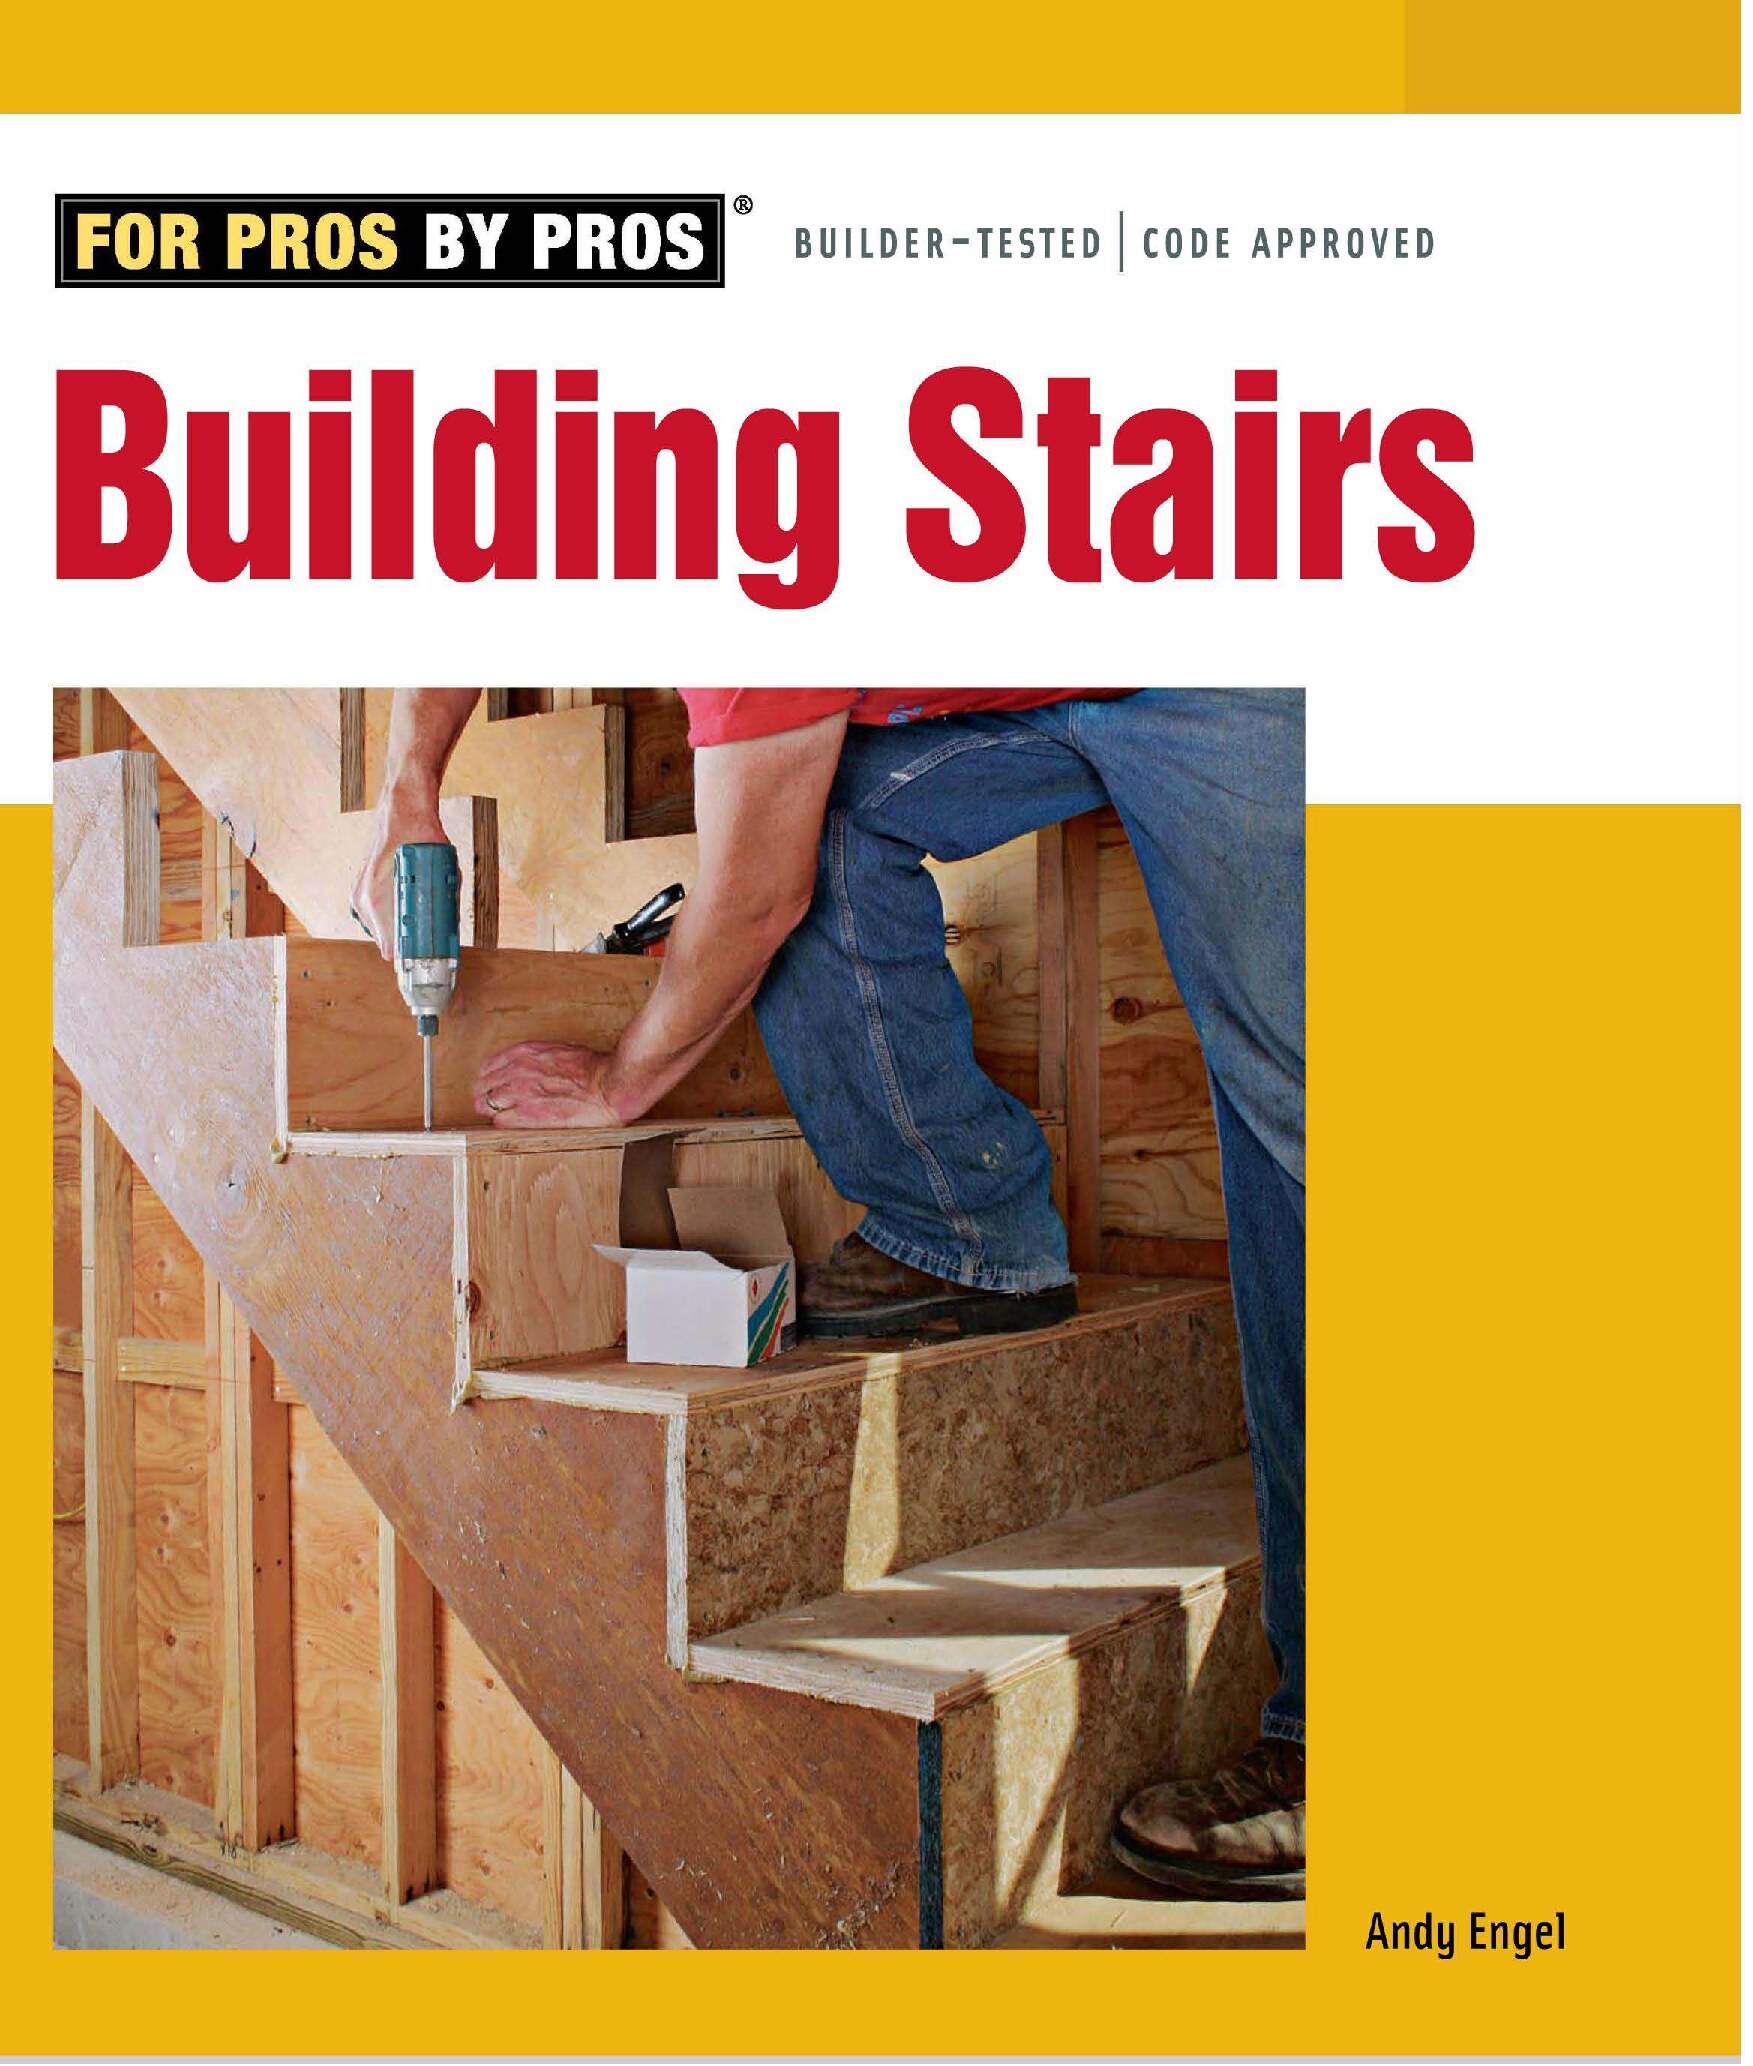 Building Stairs [For Pros By Pros] - A. Engel (Taunton Press, 2007) BBS